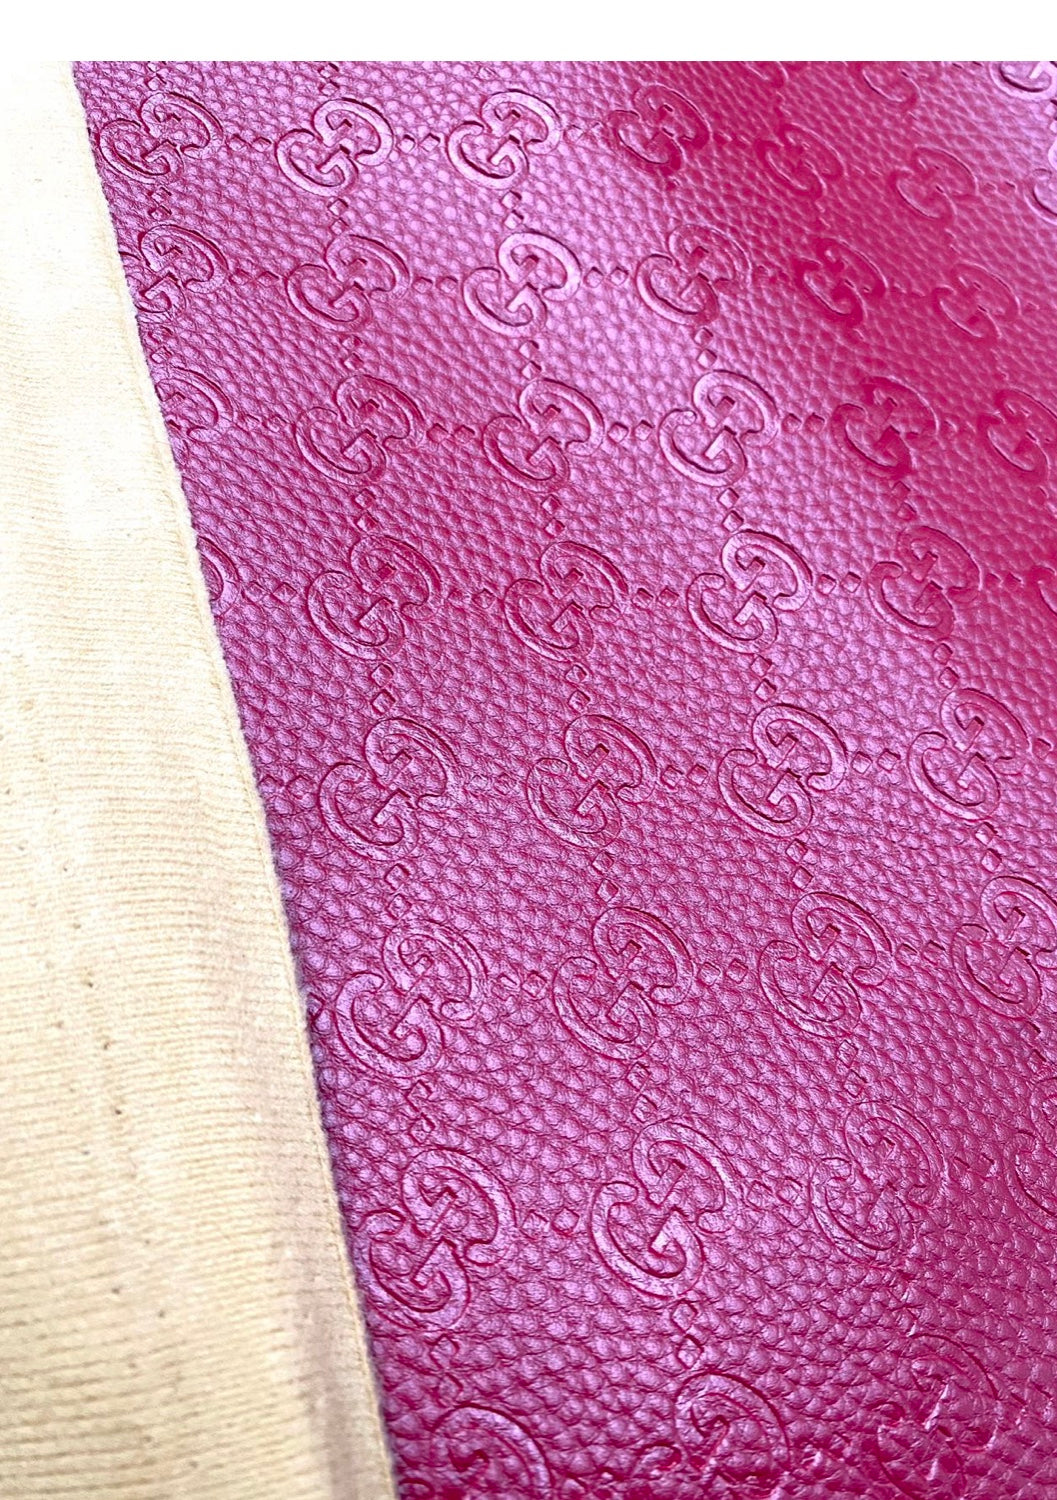 Pure Red Gucci Embossed Leather for Custom Car-interior Furniture